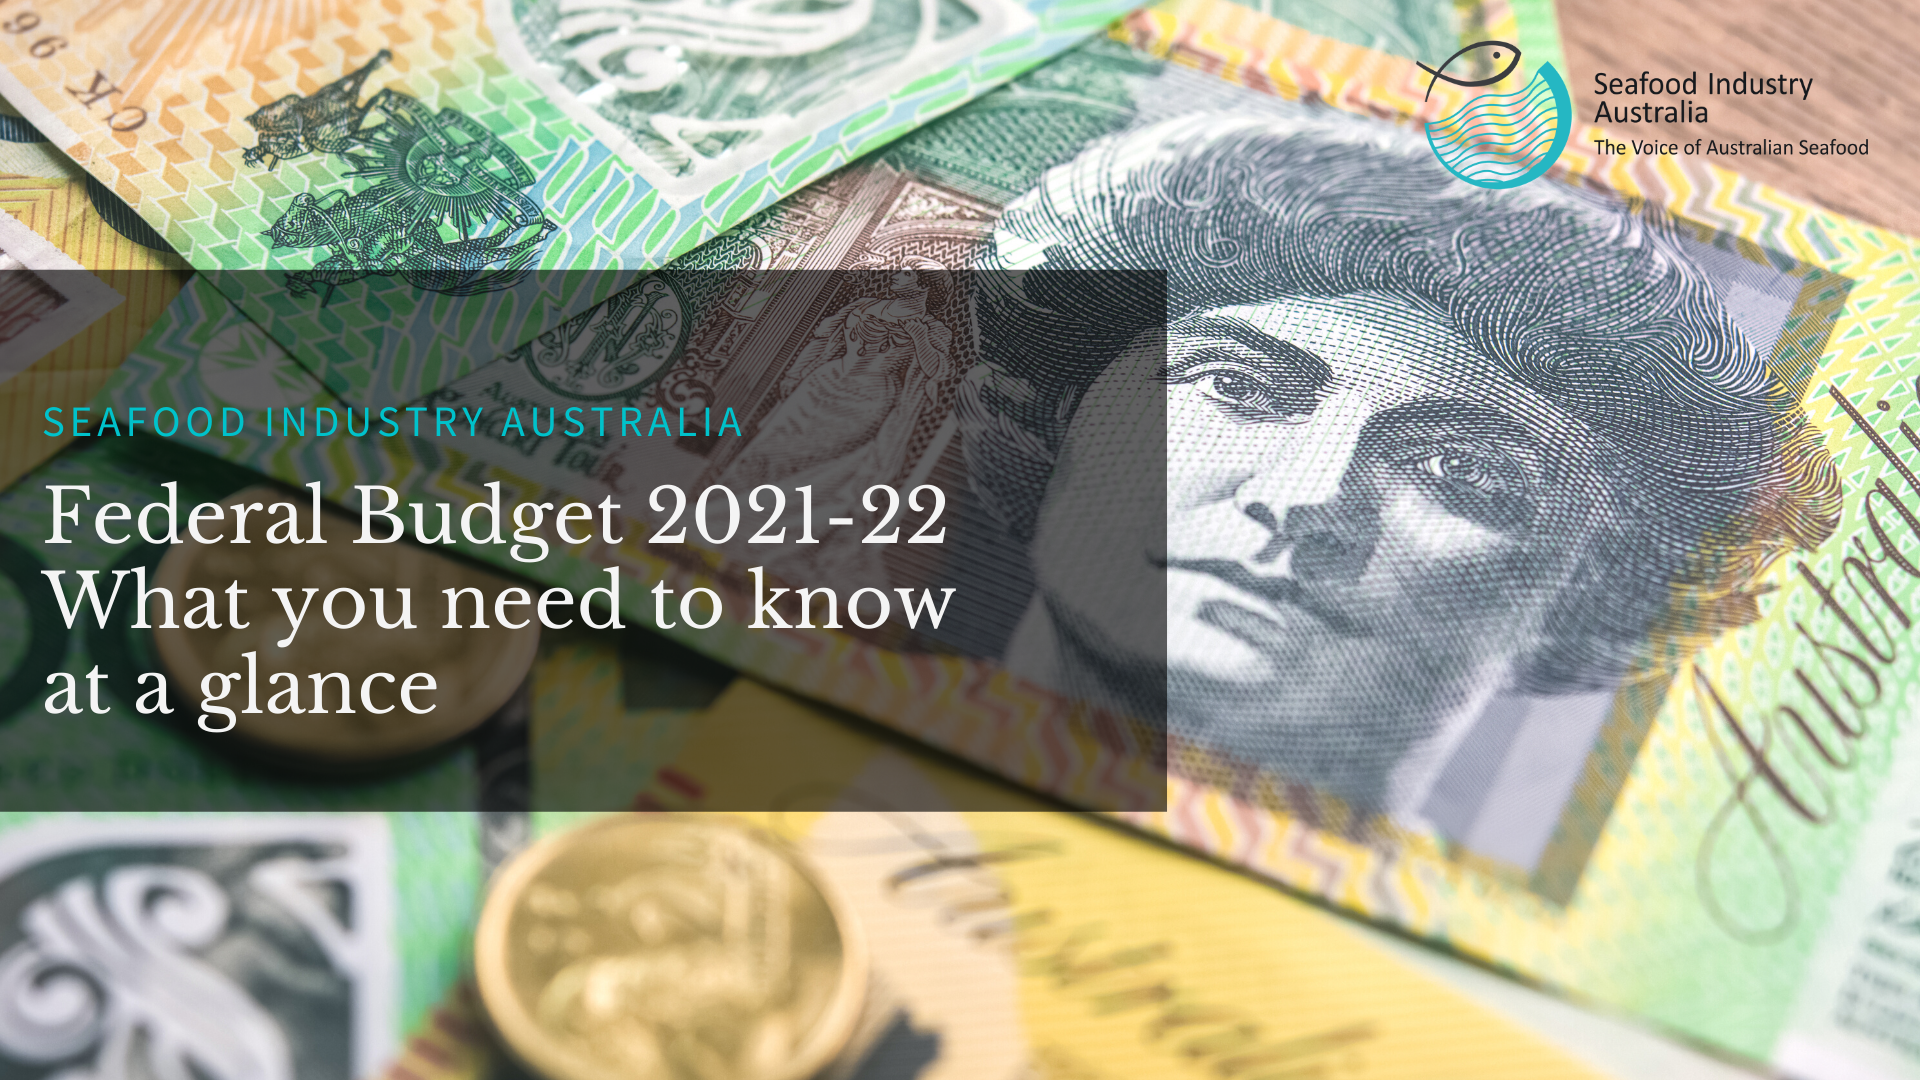 You are currently viewing SIA’s guide to the Federal Budget 2021-22 at a glance